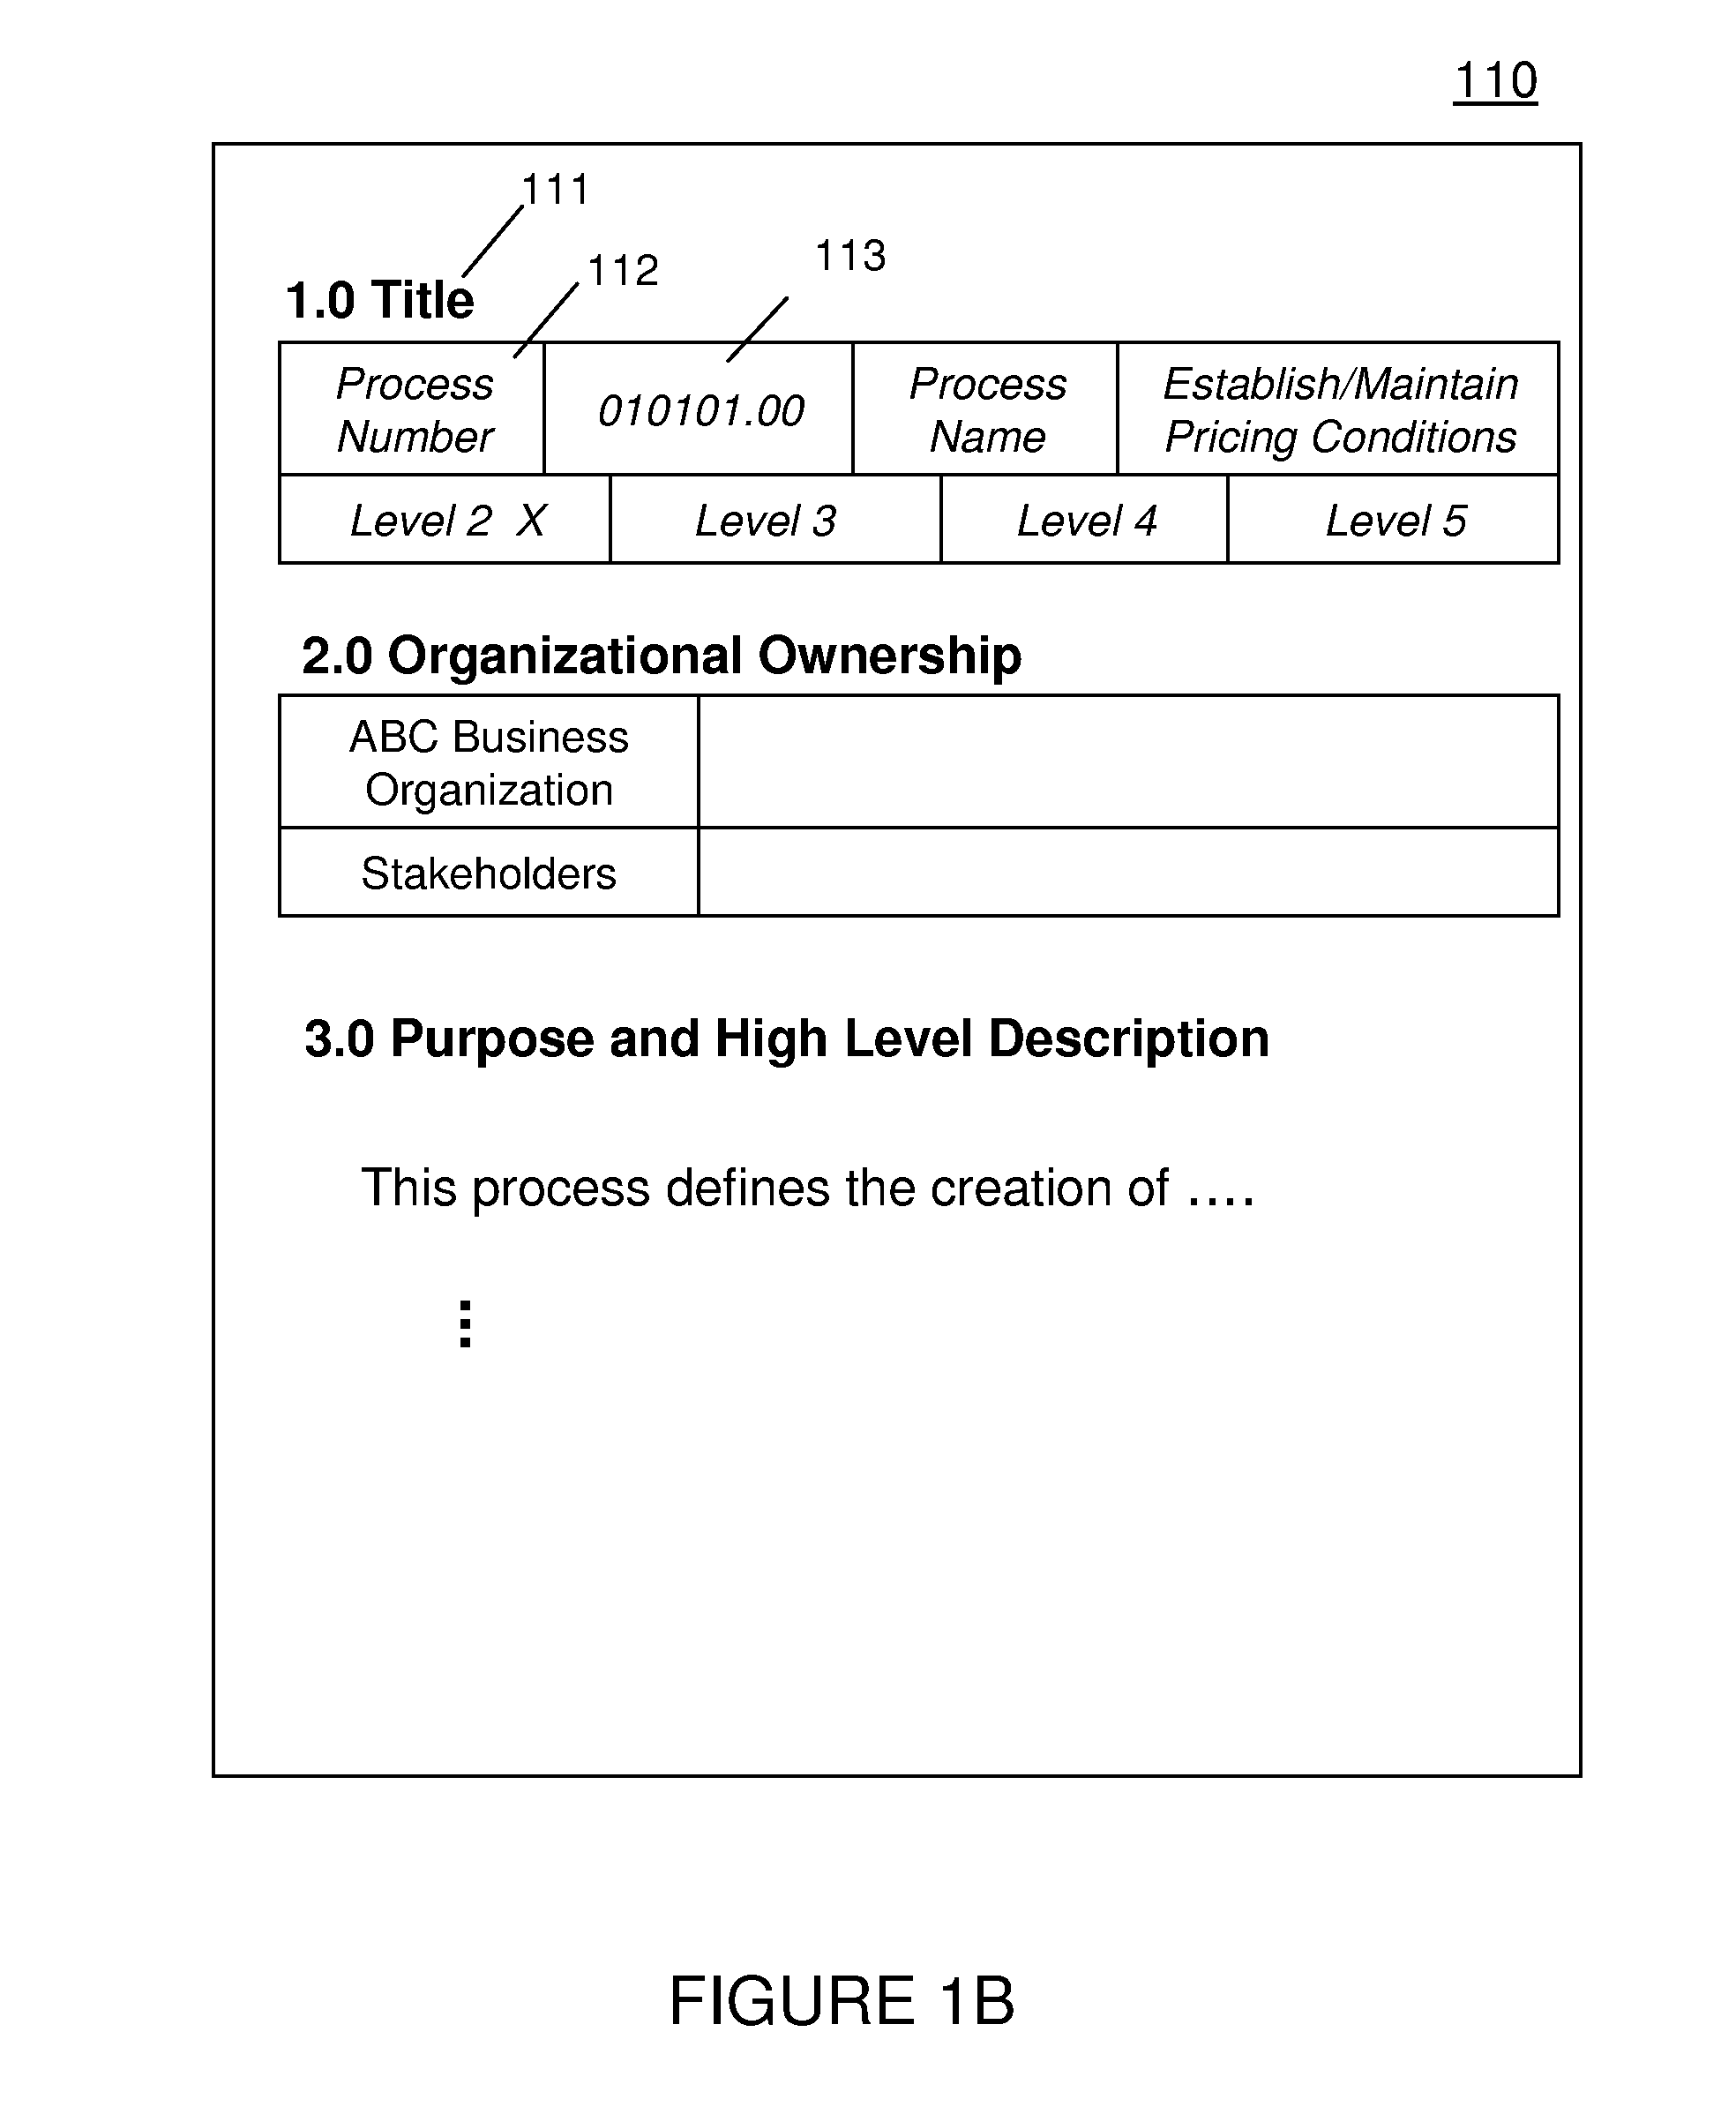 Method to identify common structures in formatted text documents